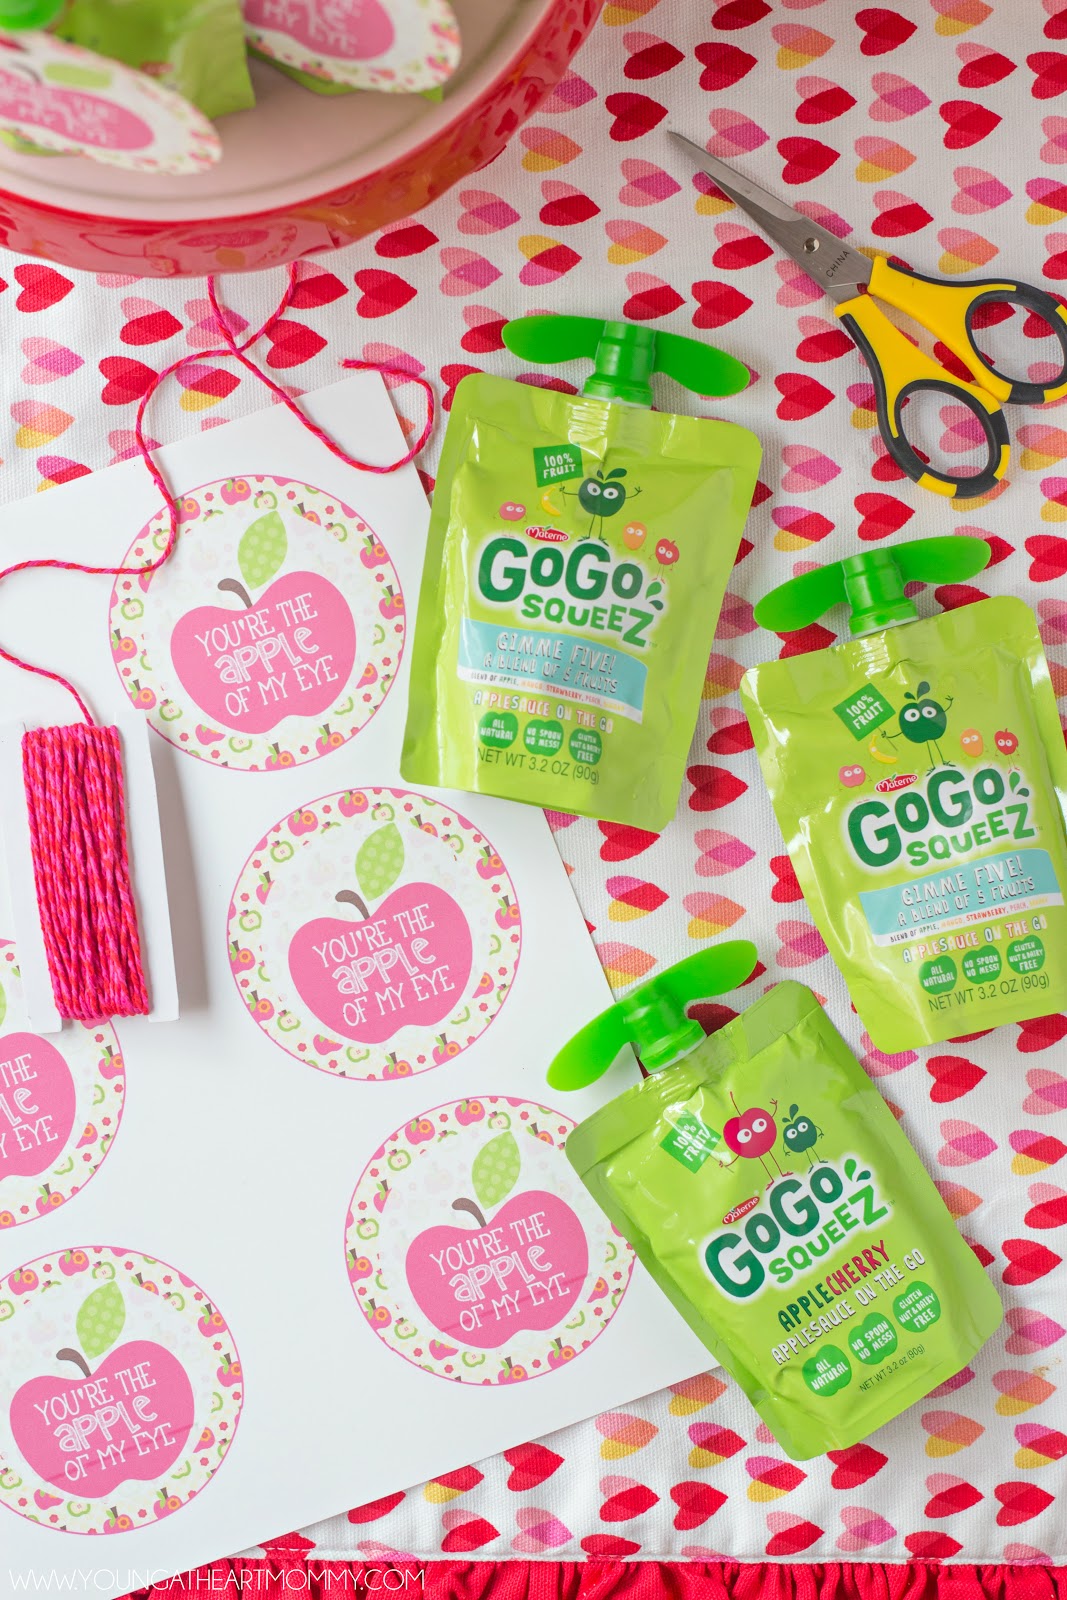 "You're The Apple Of My Eye" GoGo squeeZ Valentines ...